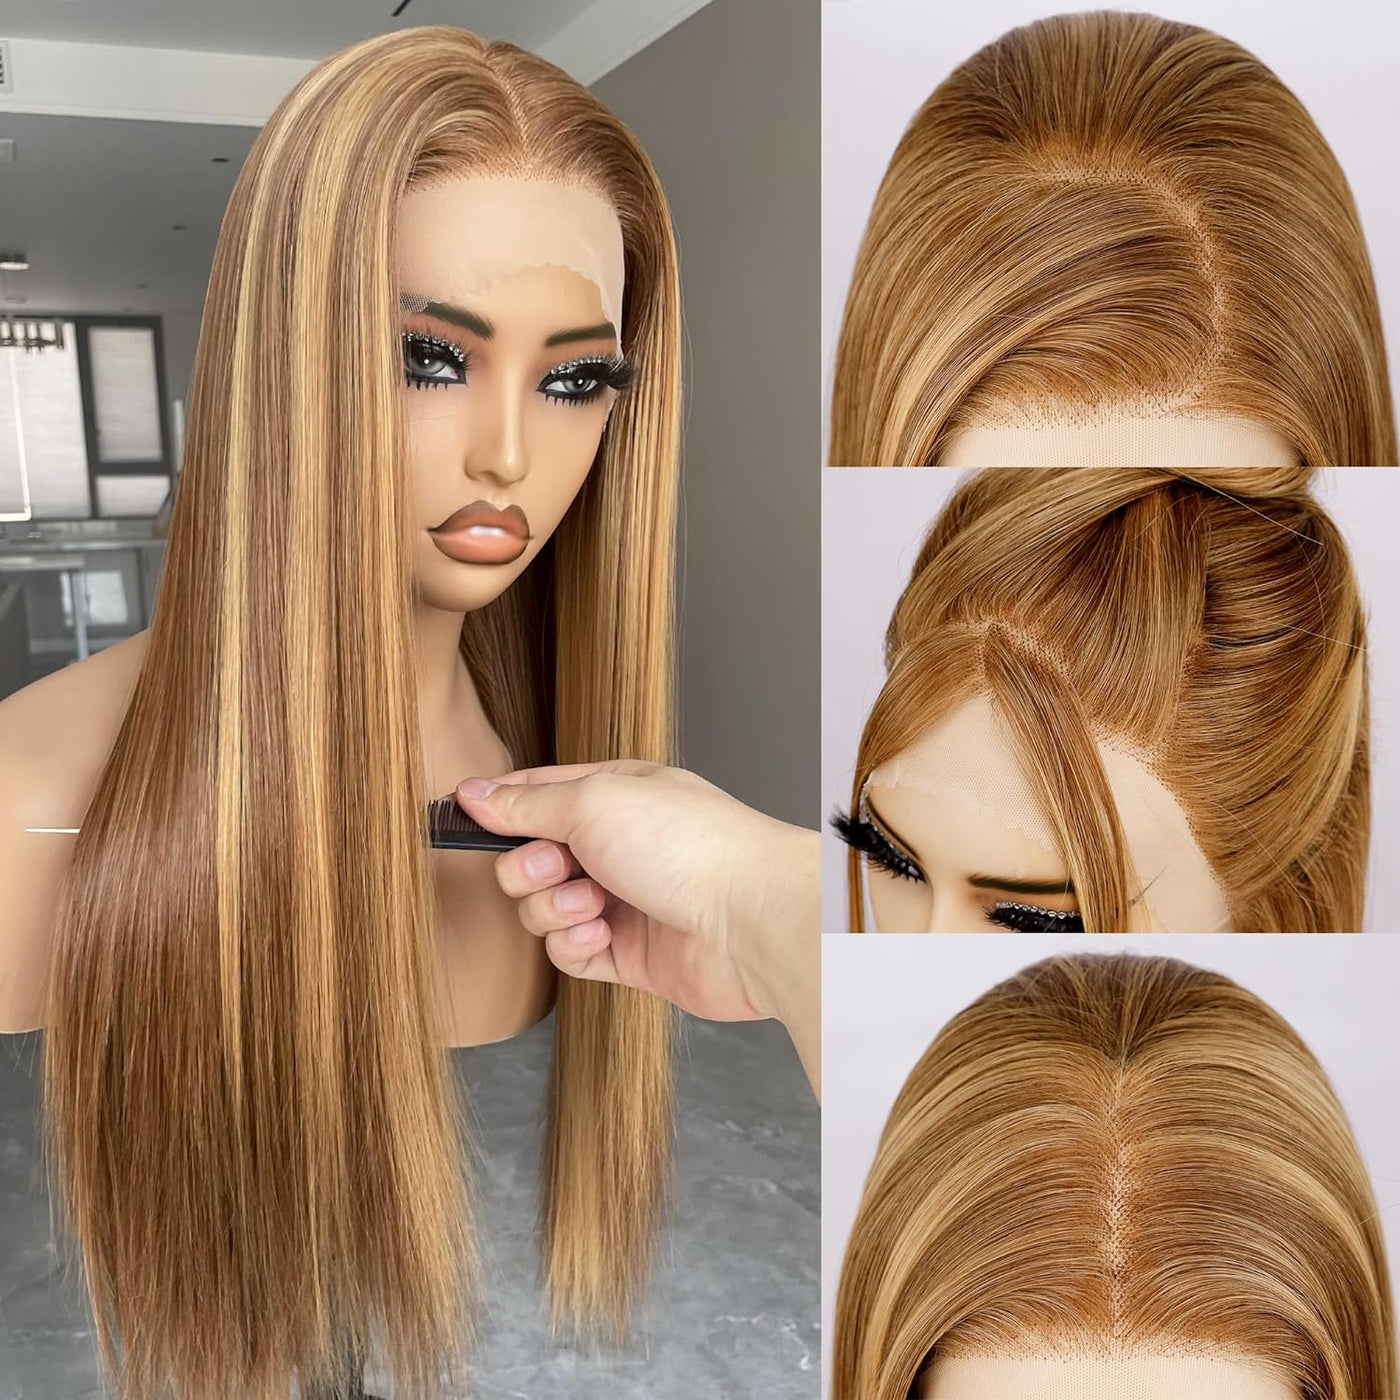 Synthetic Lace Front Wig, 13x4 Hd Lace Wigs Pre Plucked Long Straight Glueless Natural Black Wigs For Black Women 26inch Ready to Wear Wigs With Baby Hair